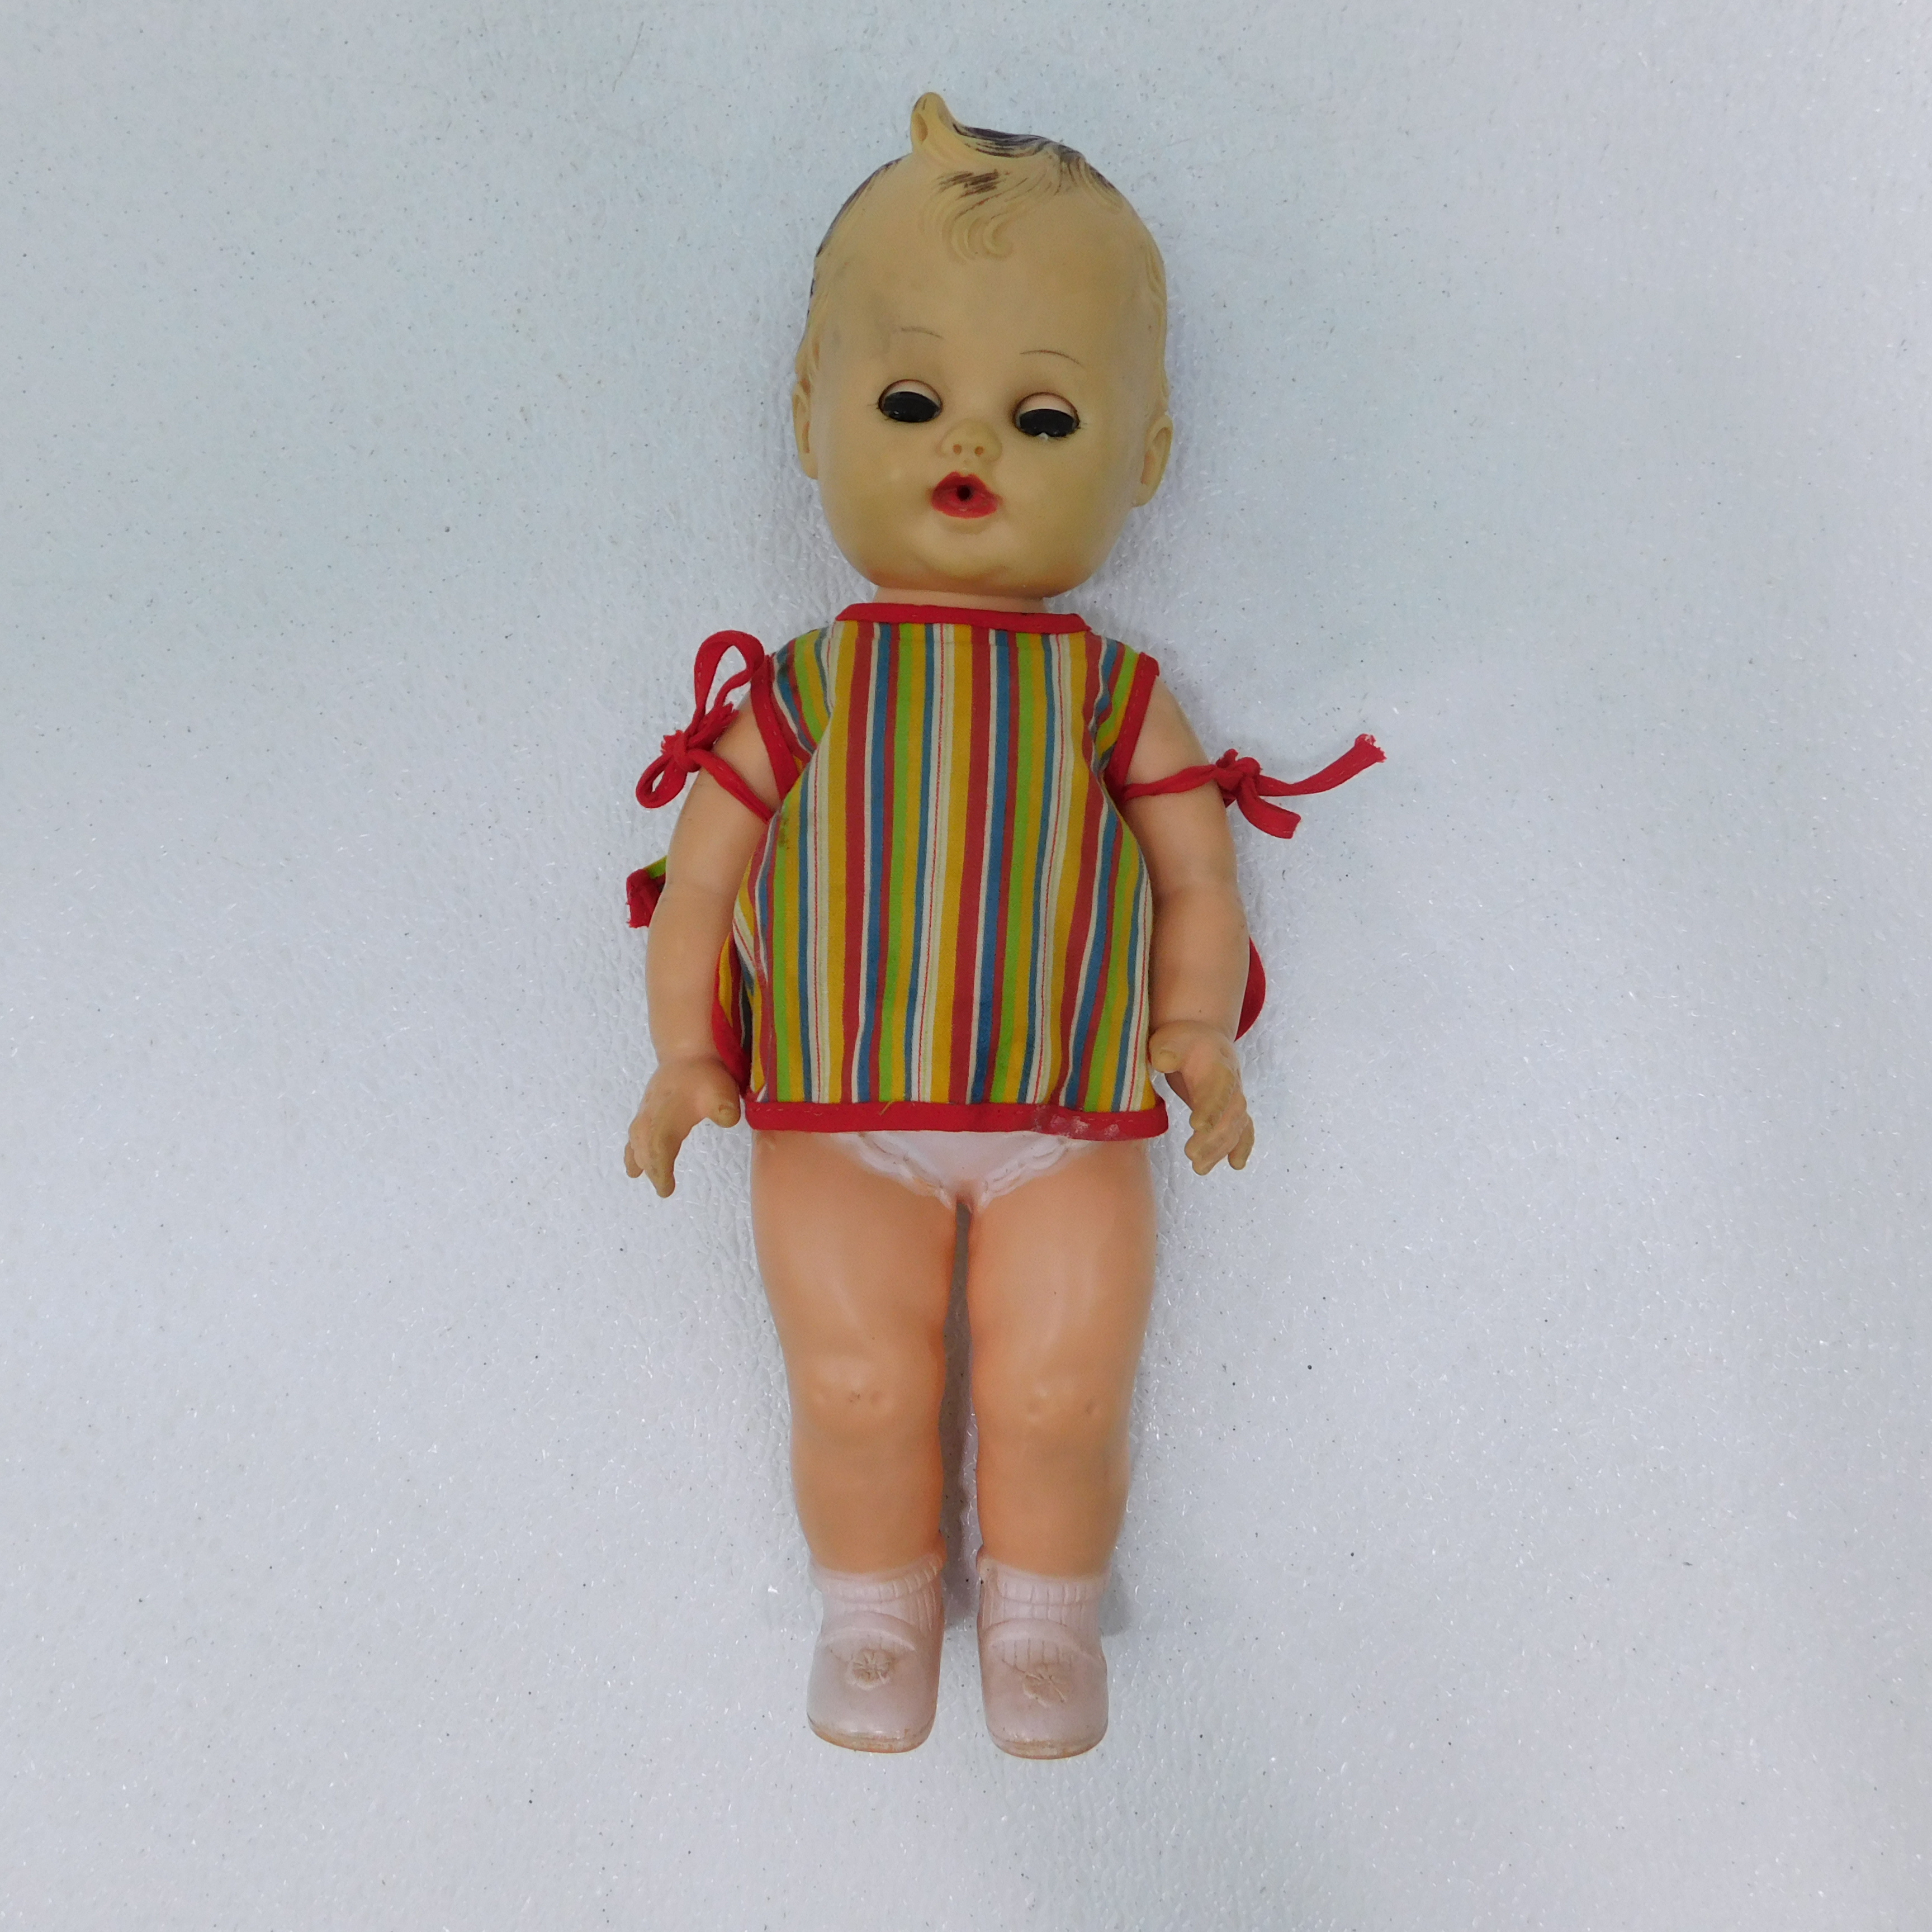 Buy the Vintage Sun Rubber Company Baby Doll | GoodwillFinds